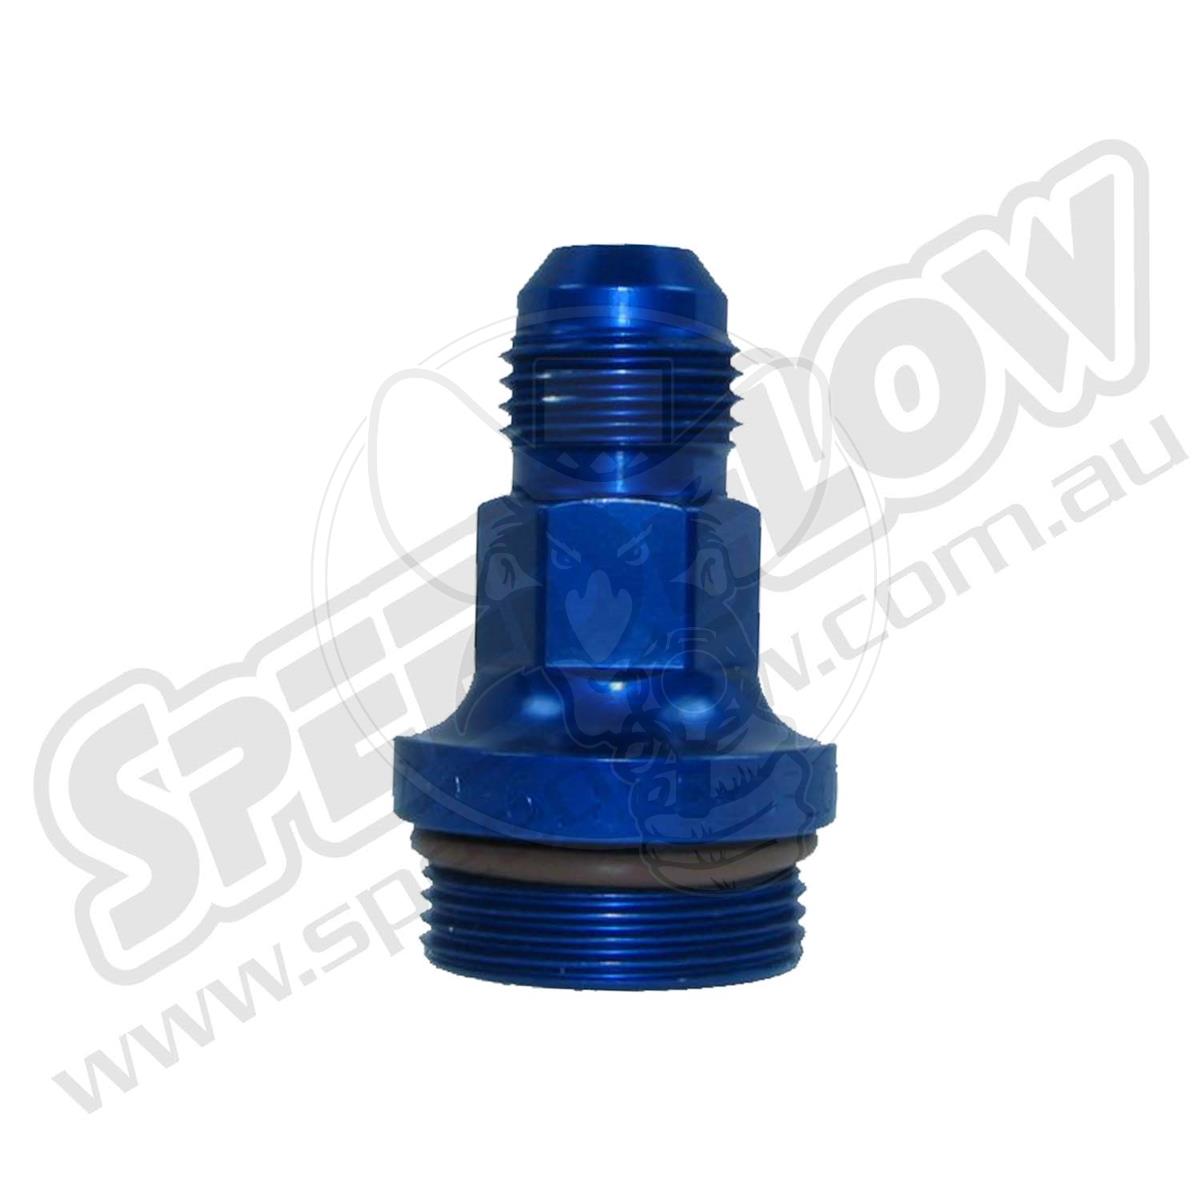 SPEEDFLOW CARB FITTING DUAL FEED -6 MALE to 7/8" FITS HOLLEY BLUE